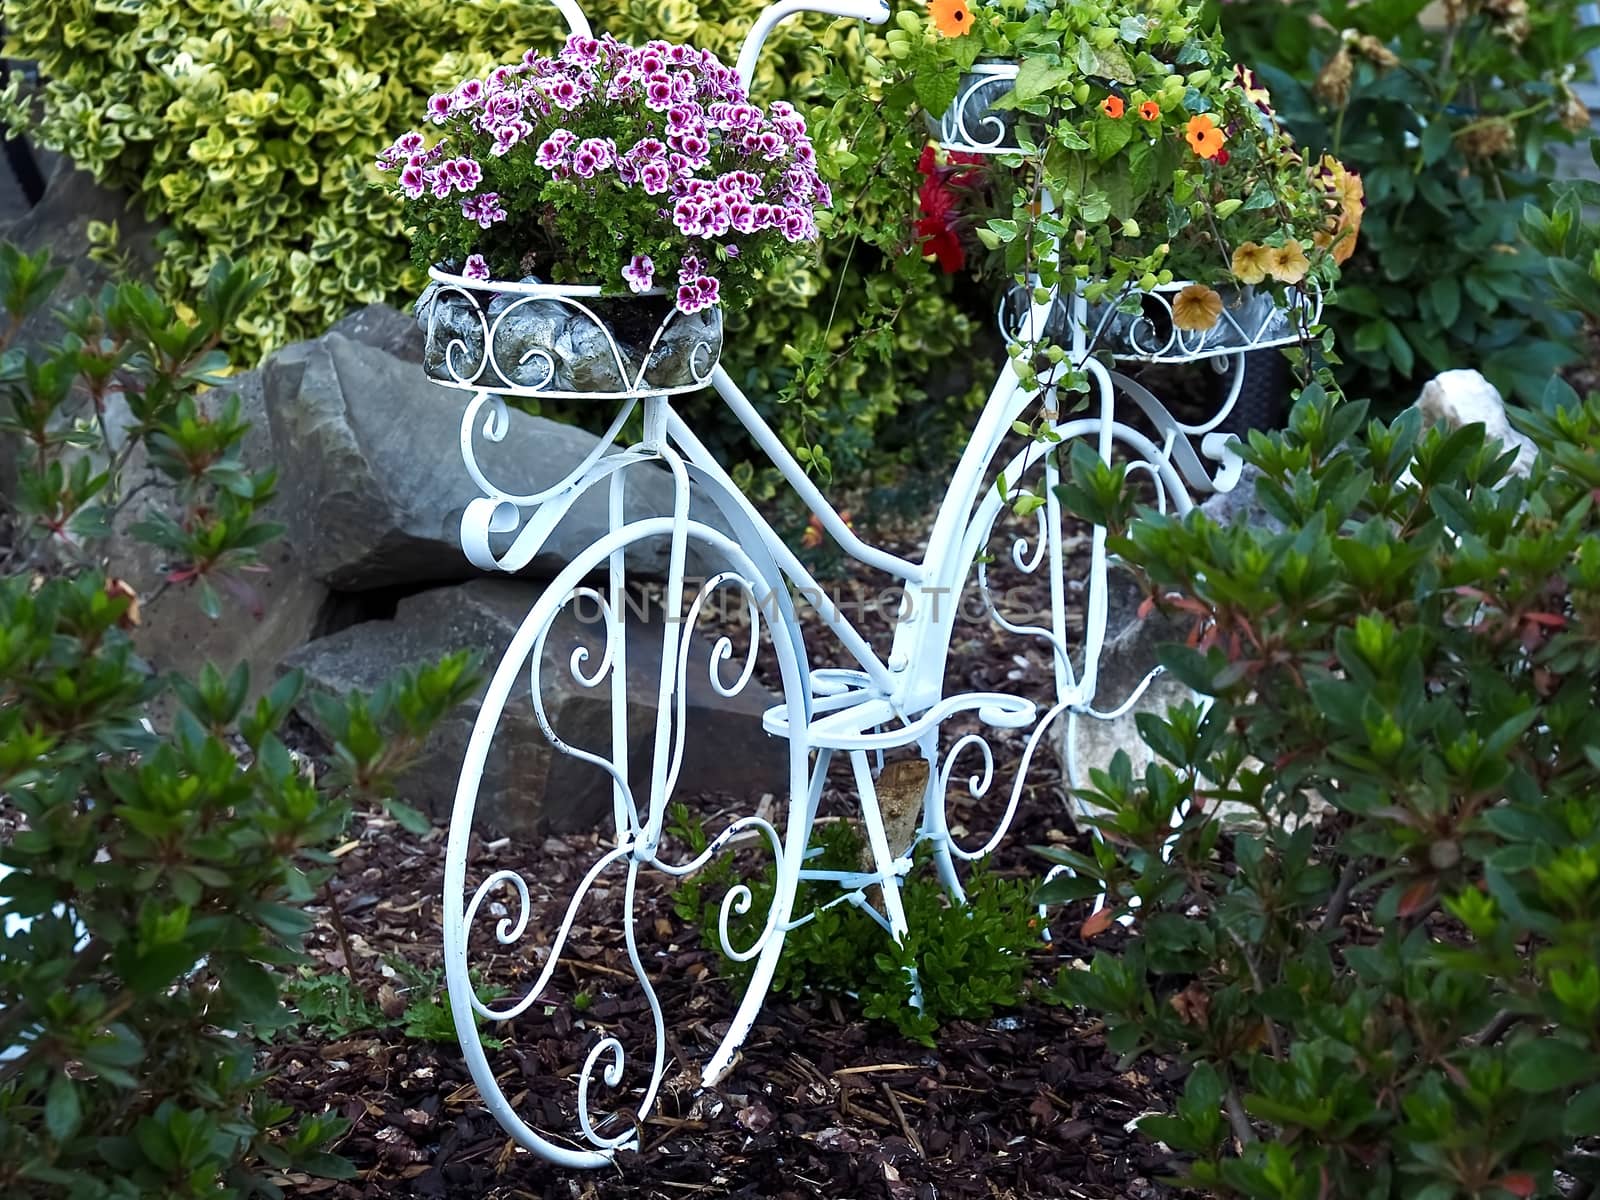 Onamental white bicycle in a garden decorated with flowers